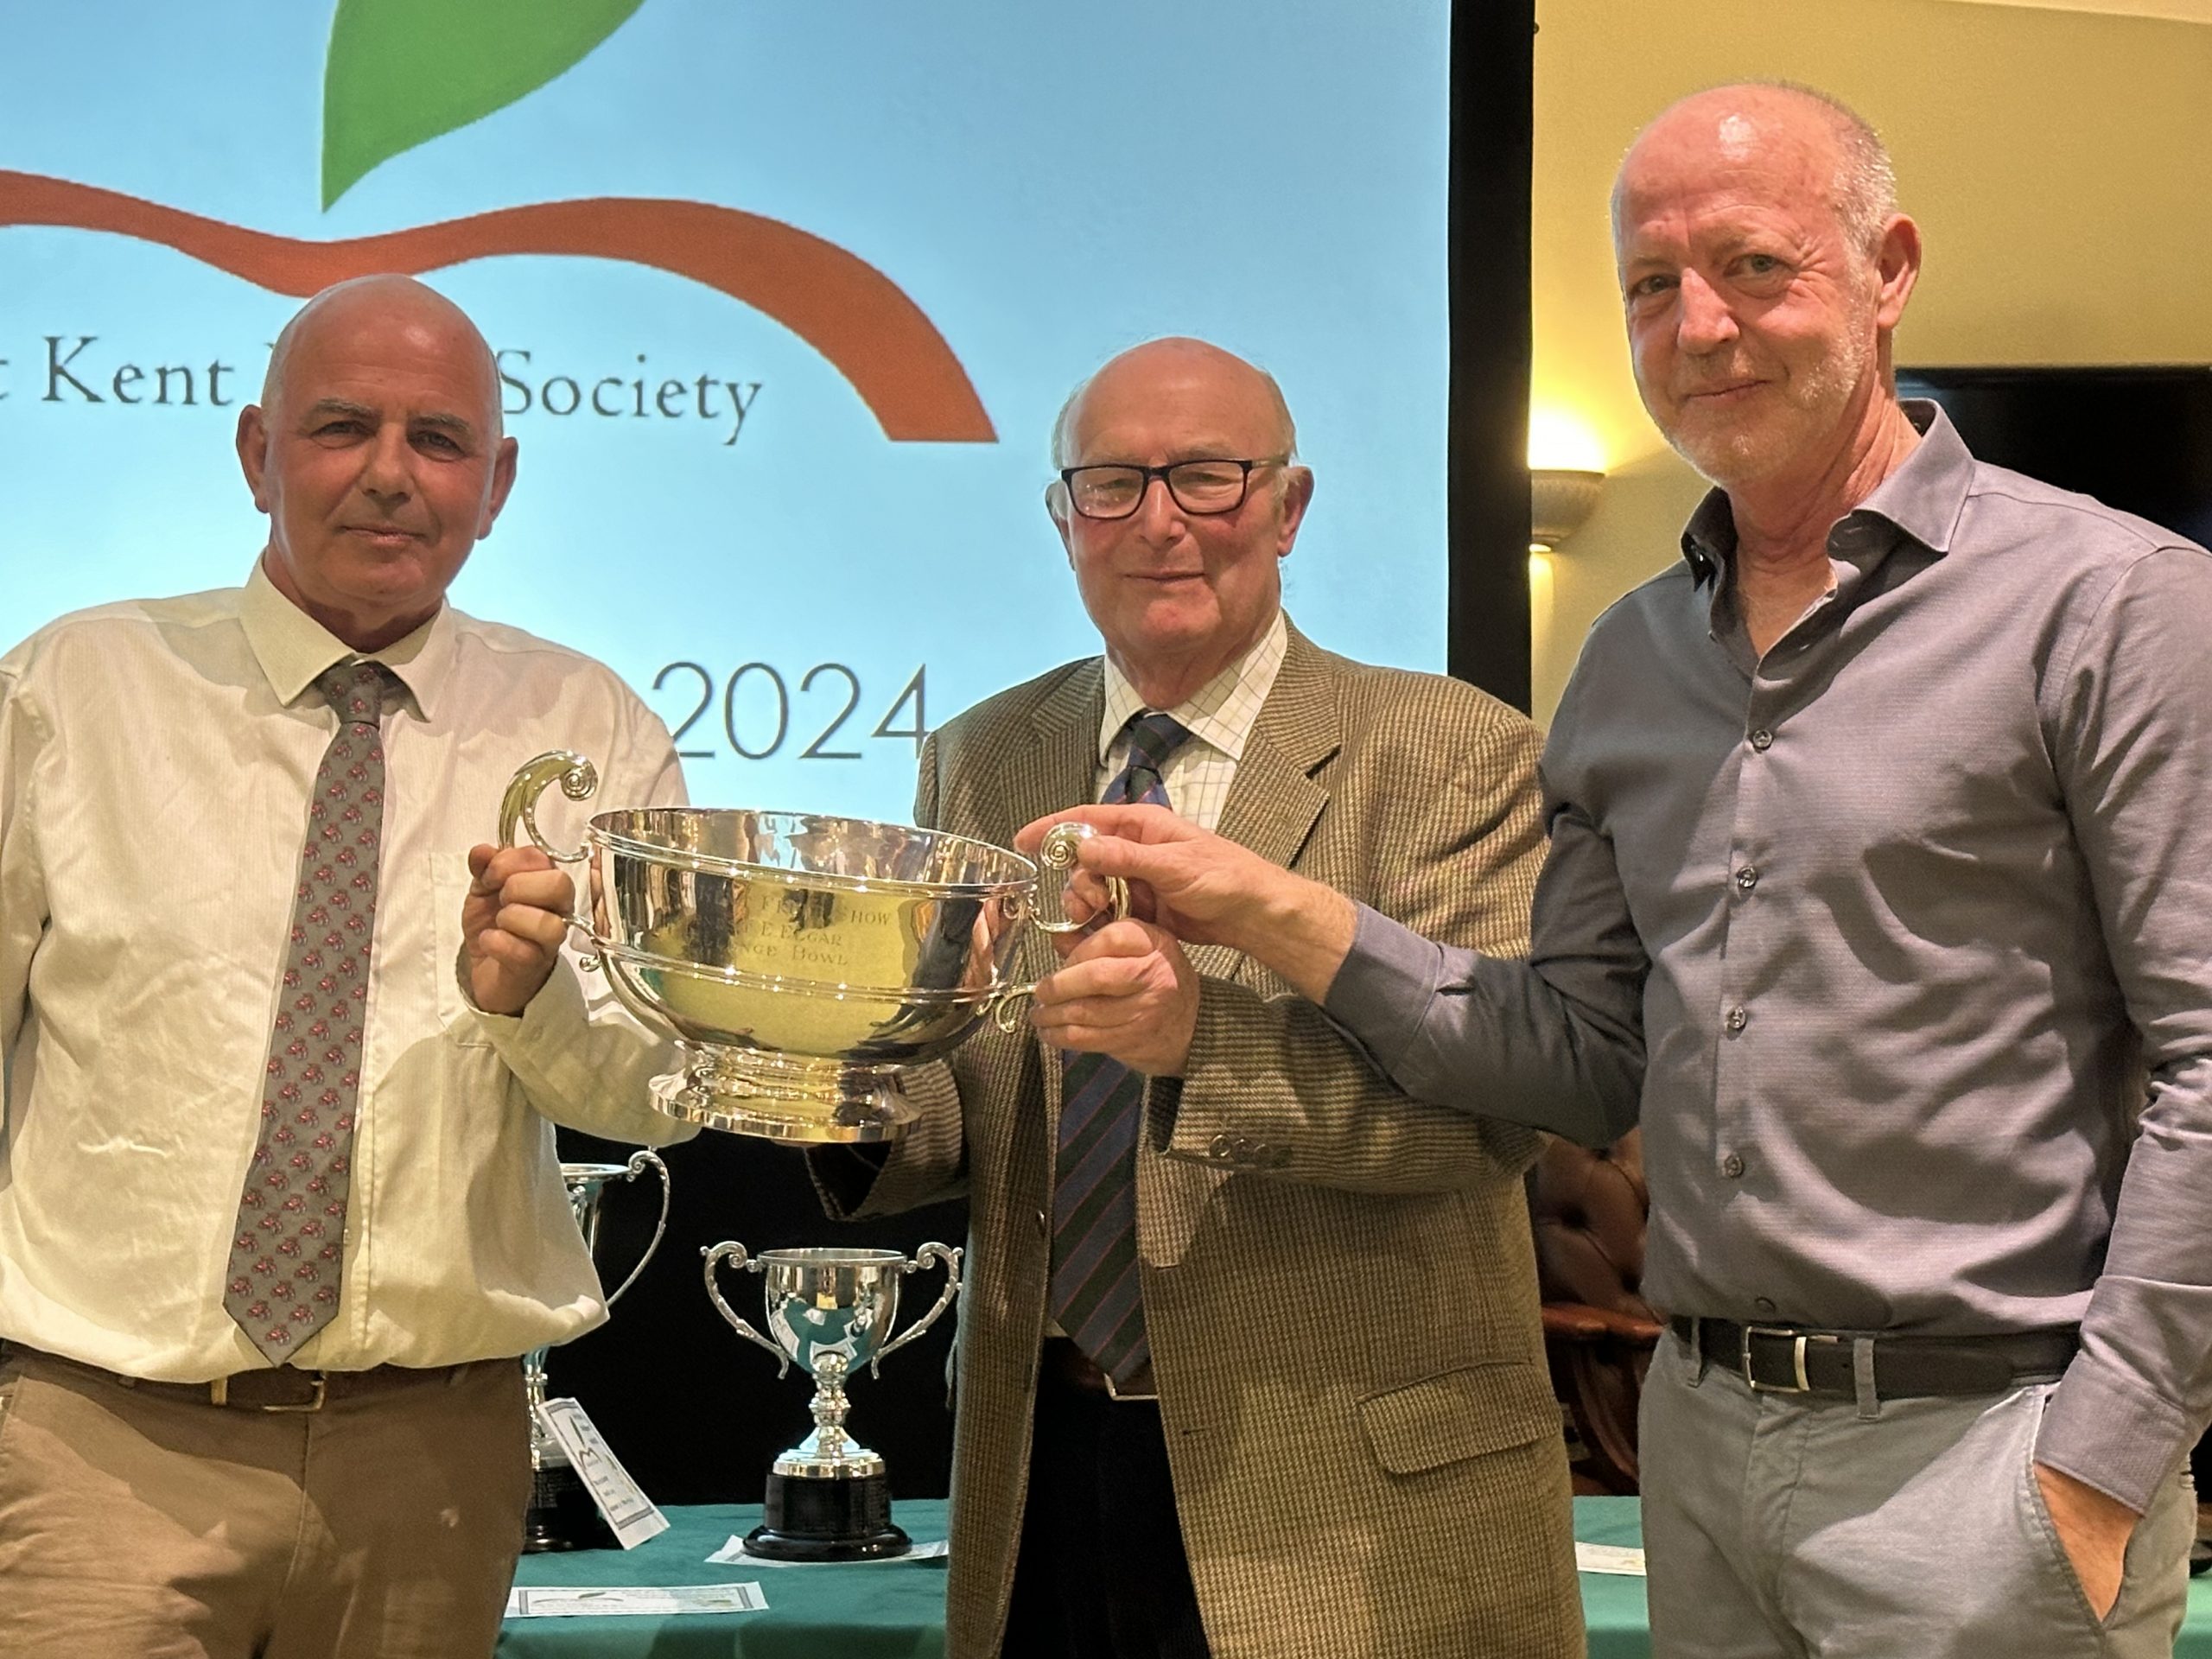 William & David Riccini receiving the cup from Henry Bryant